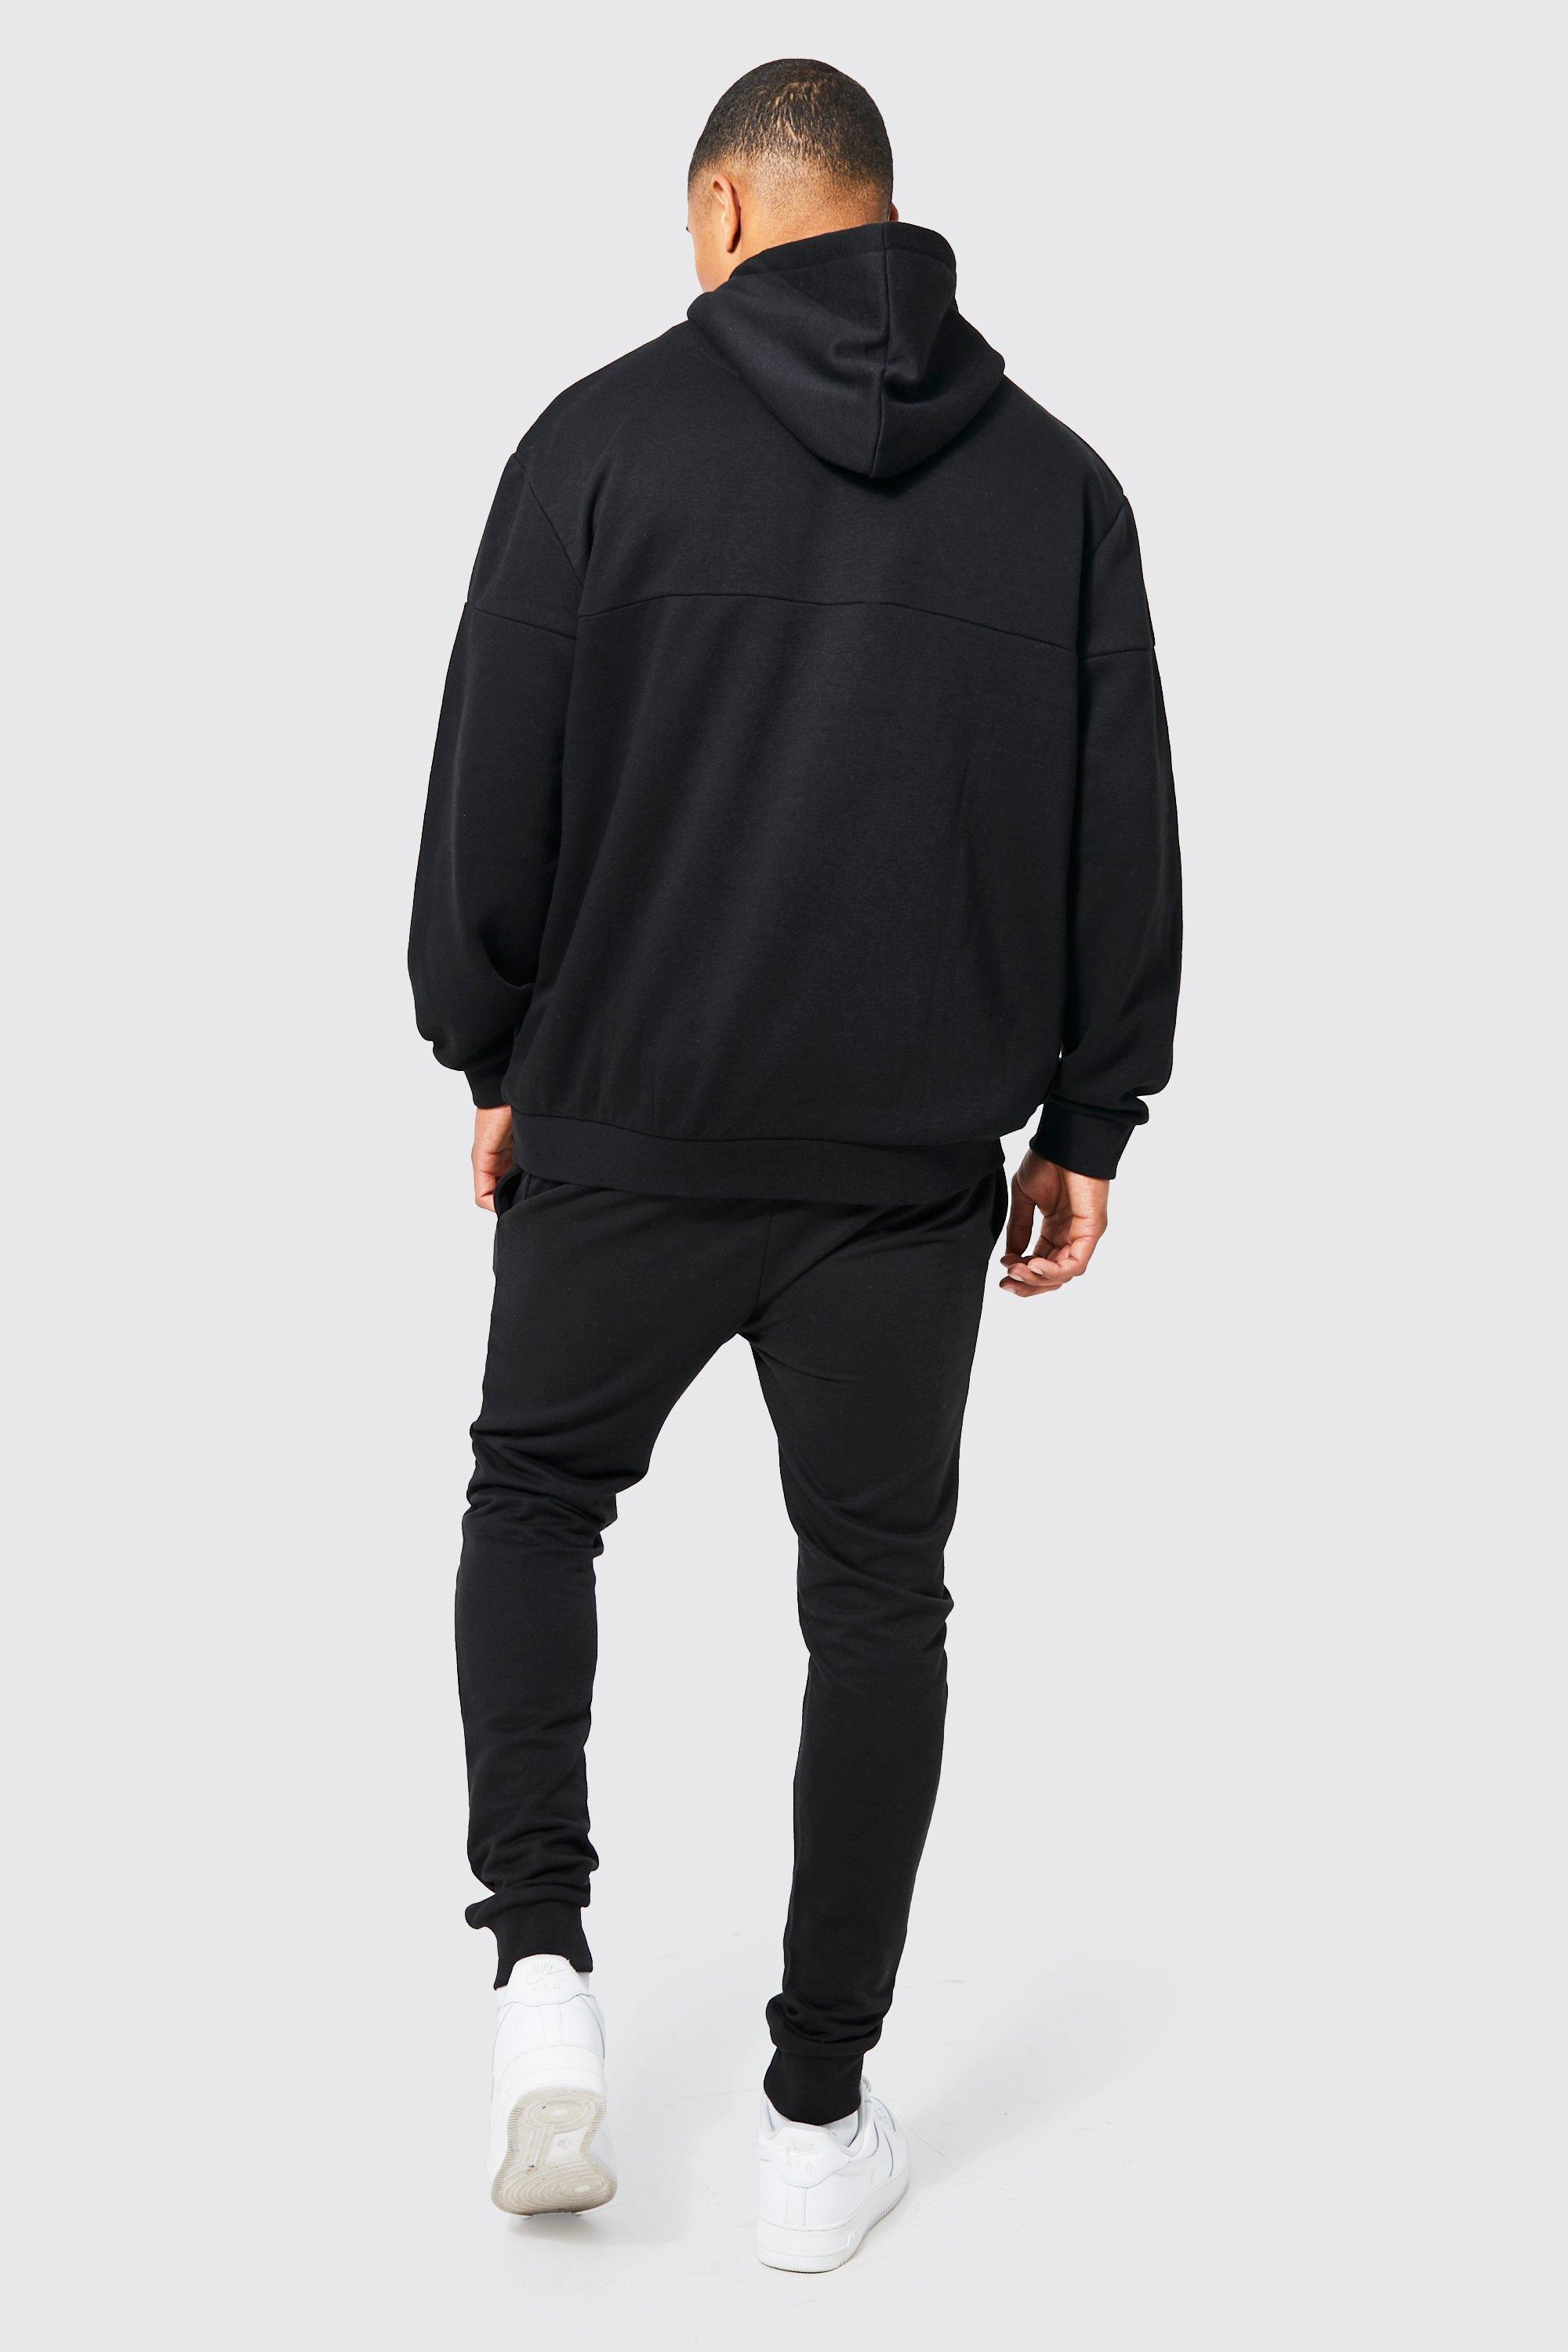 Funnel Neck Hoodies for Men - Up to 80% off